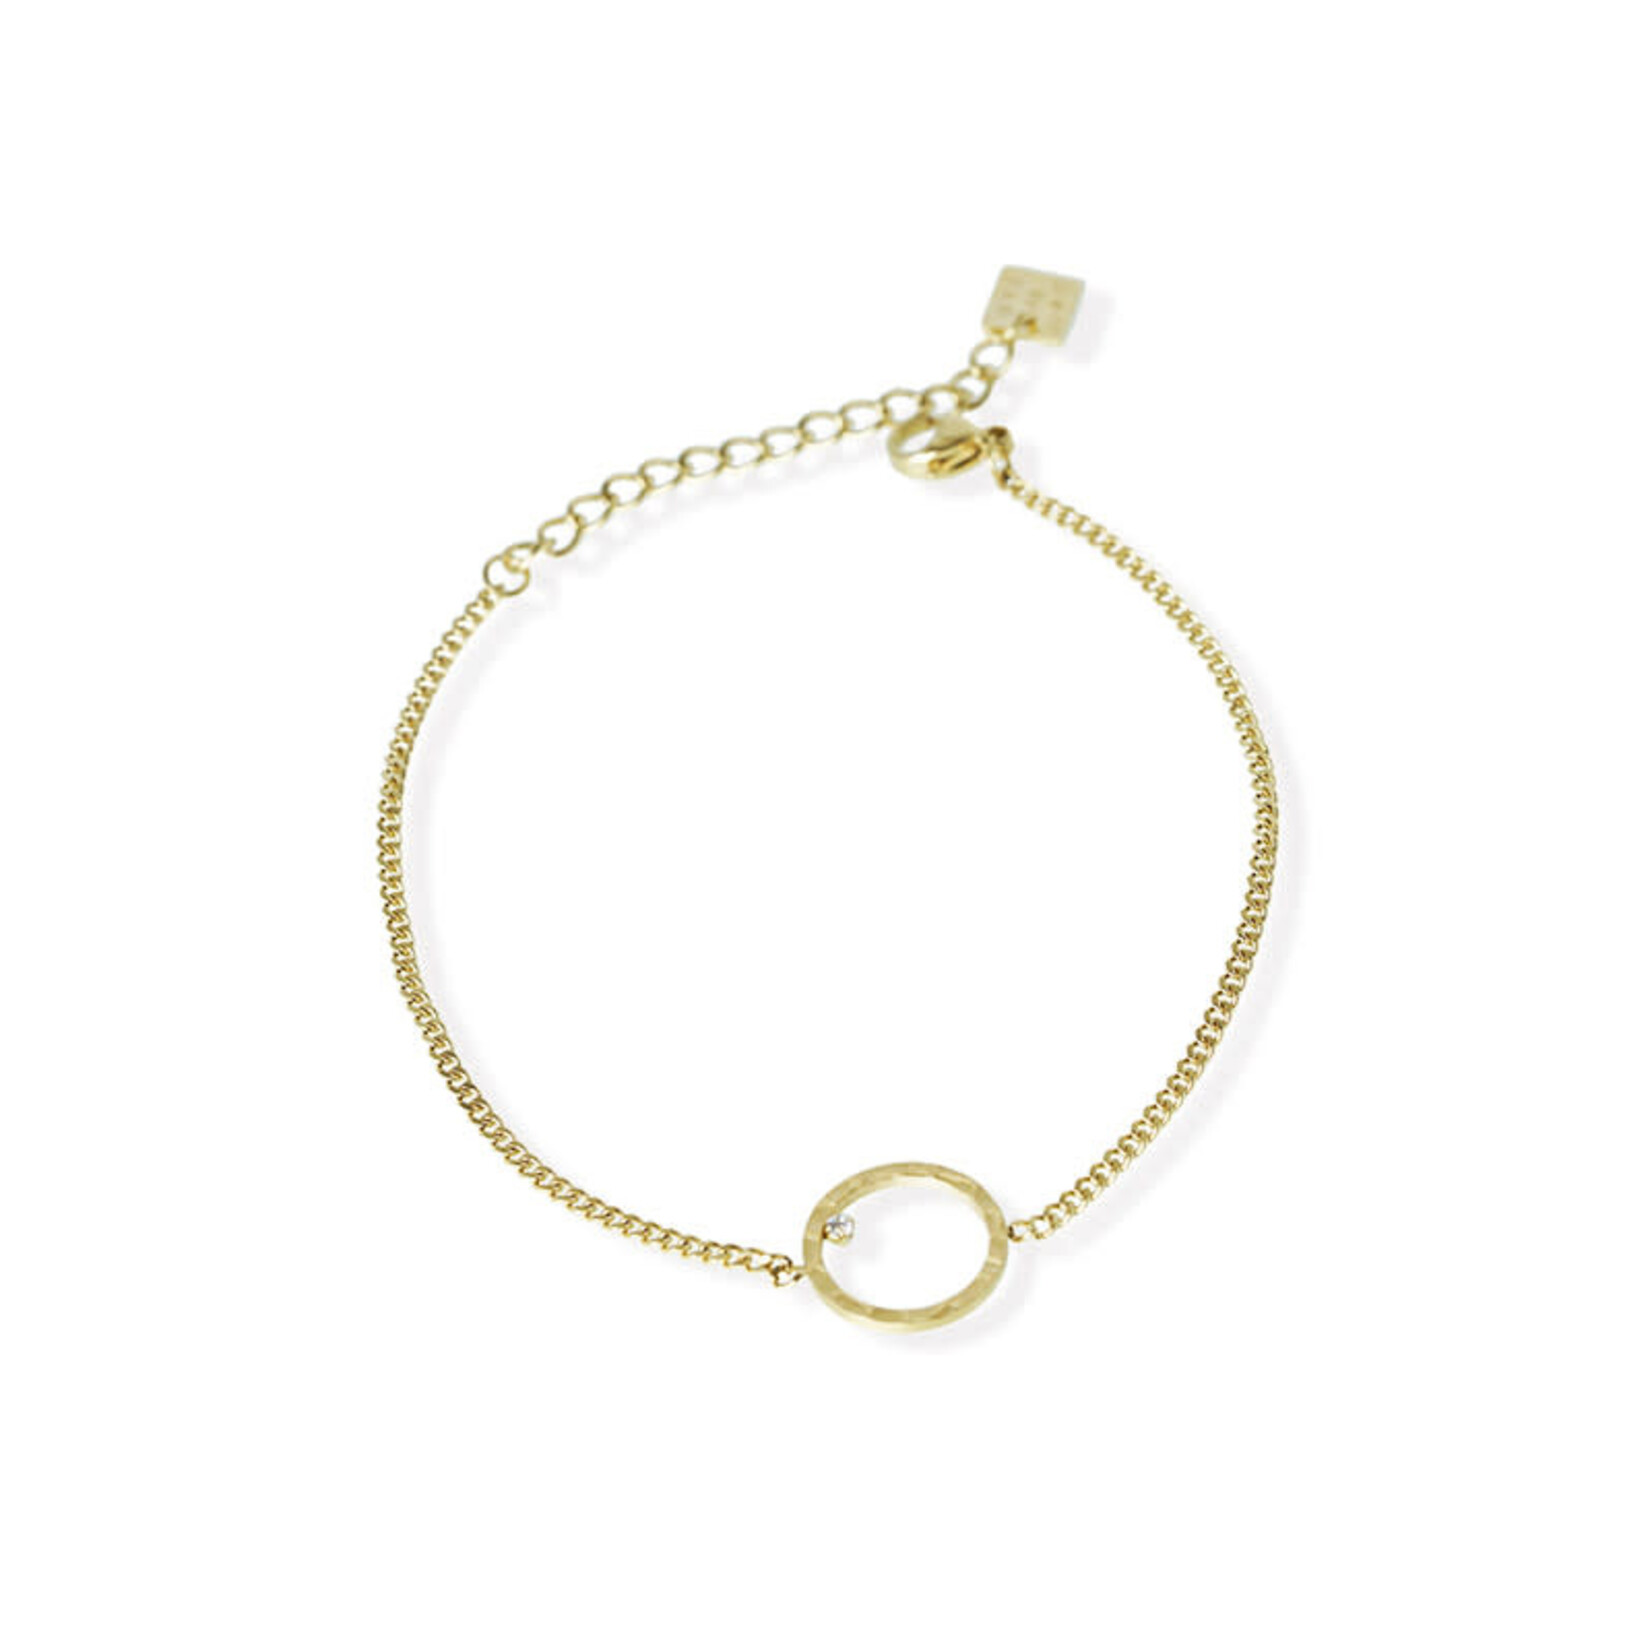 FAB Accessories Hammered Circle Bracelet -